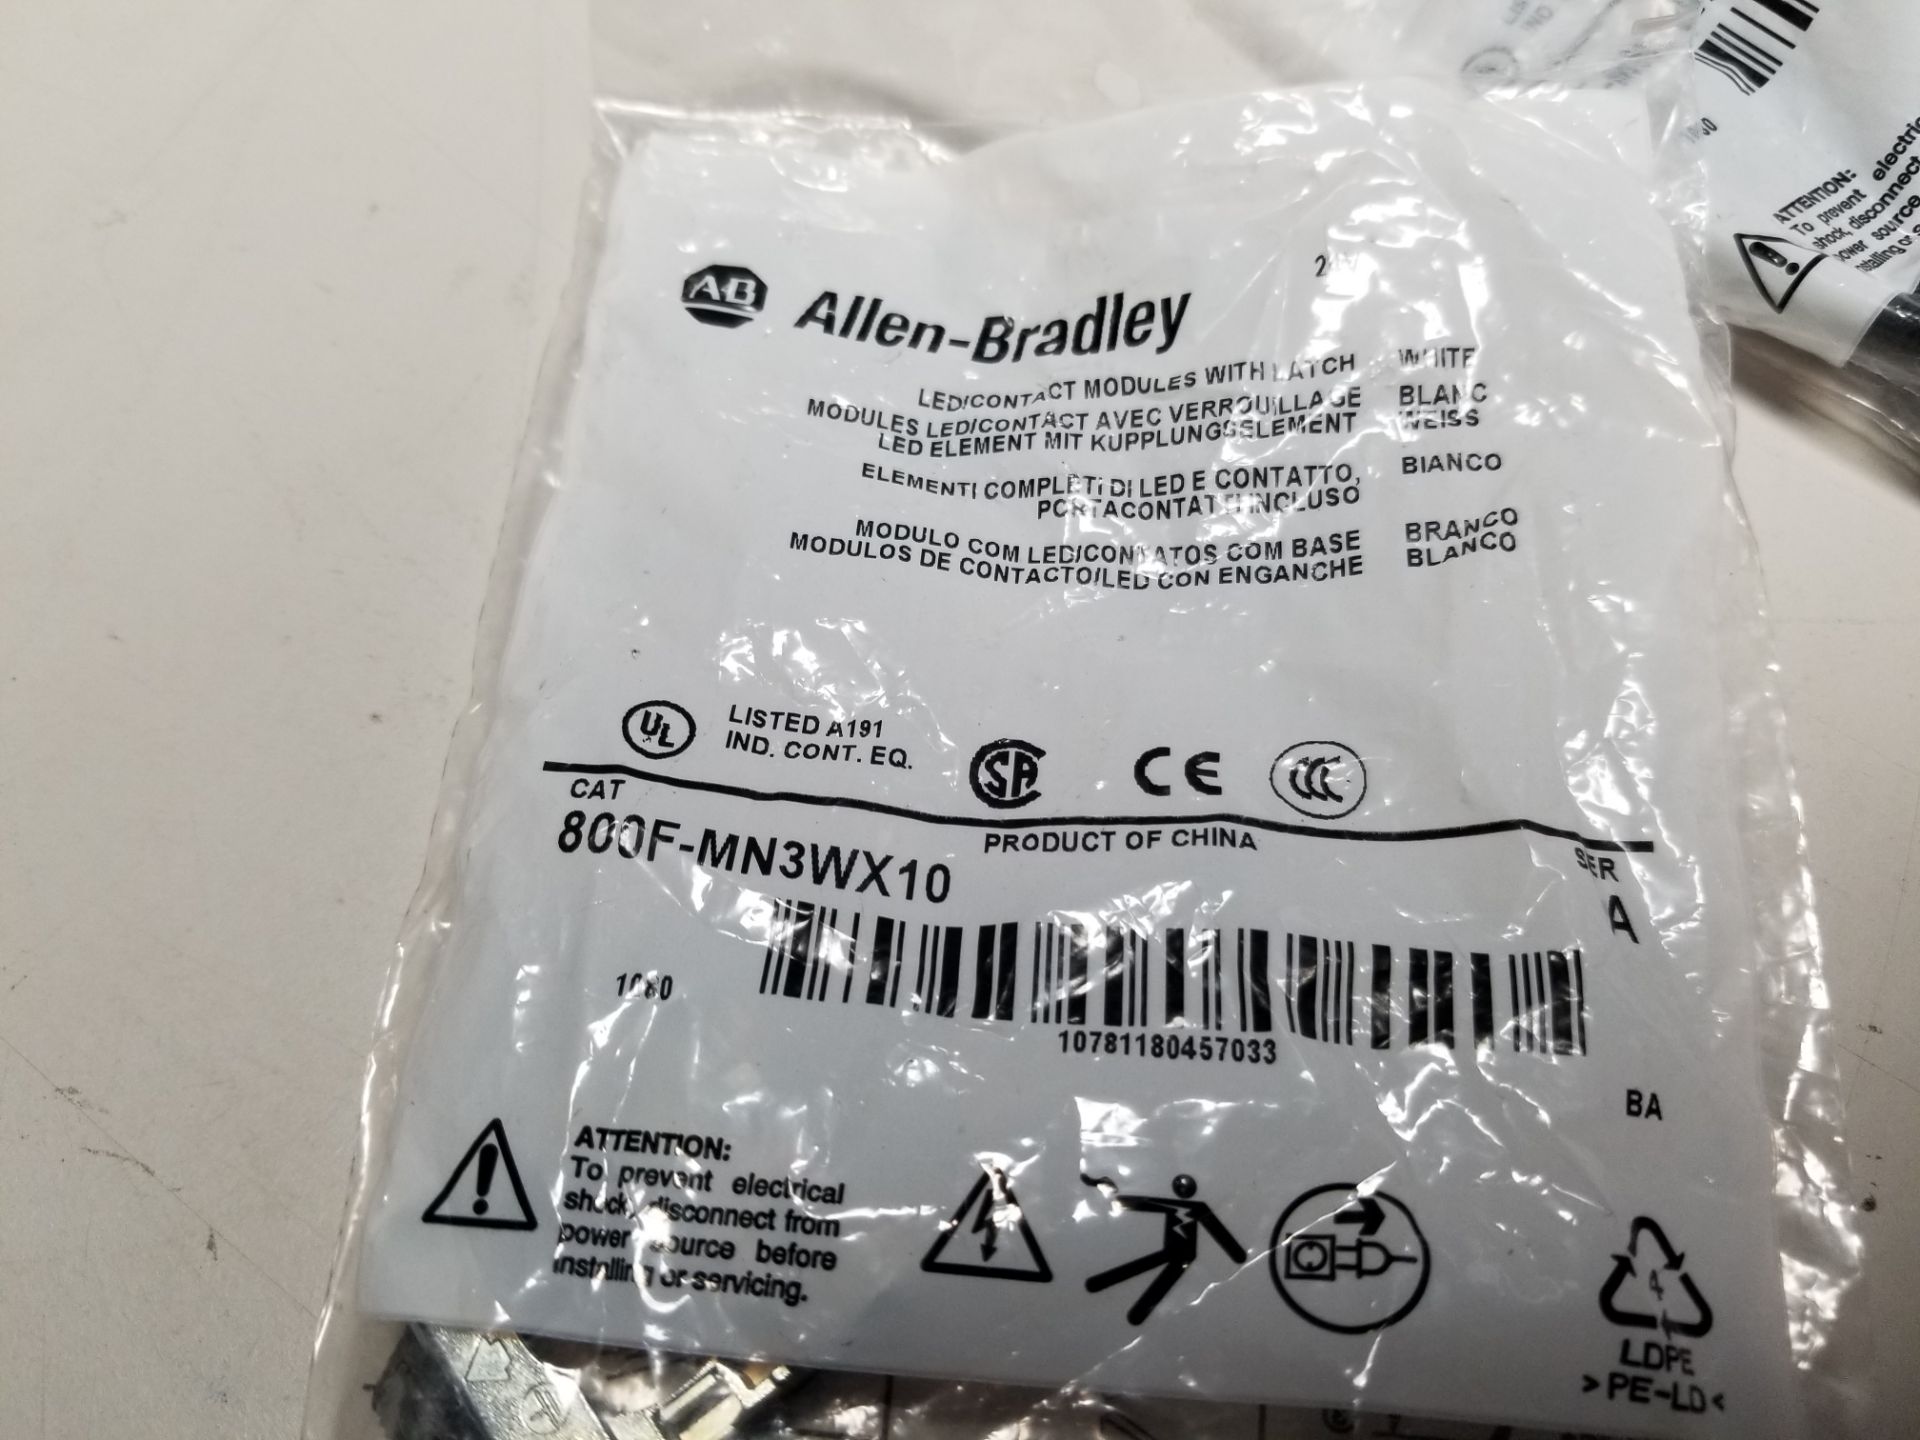 LOT OF NEW ALLEN BRADLEY LED/CONTACT MODULES WITH LATCH - Image 3 of 5